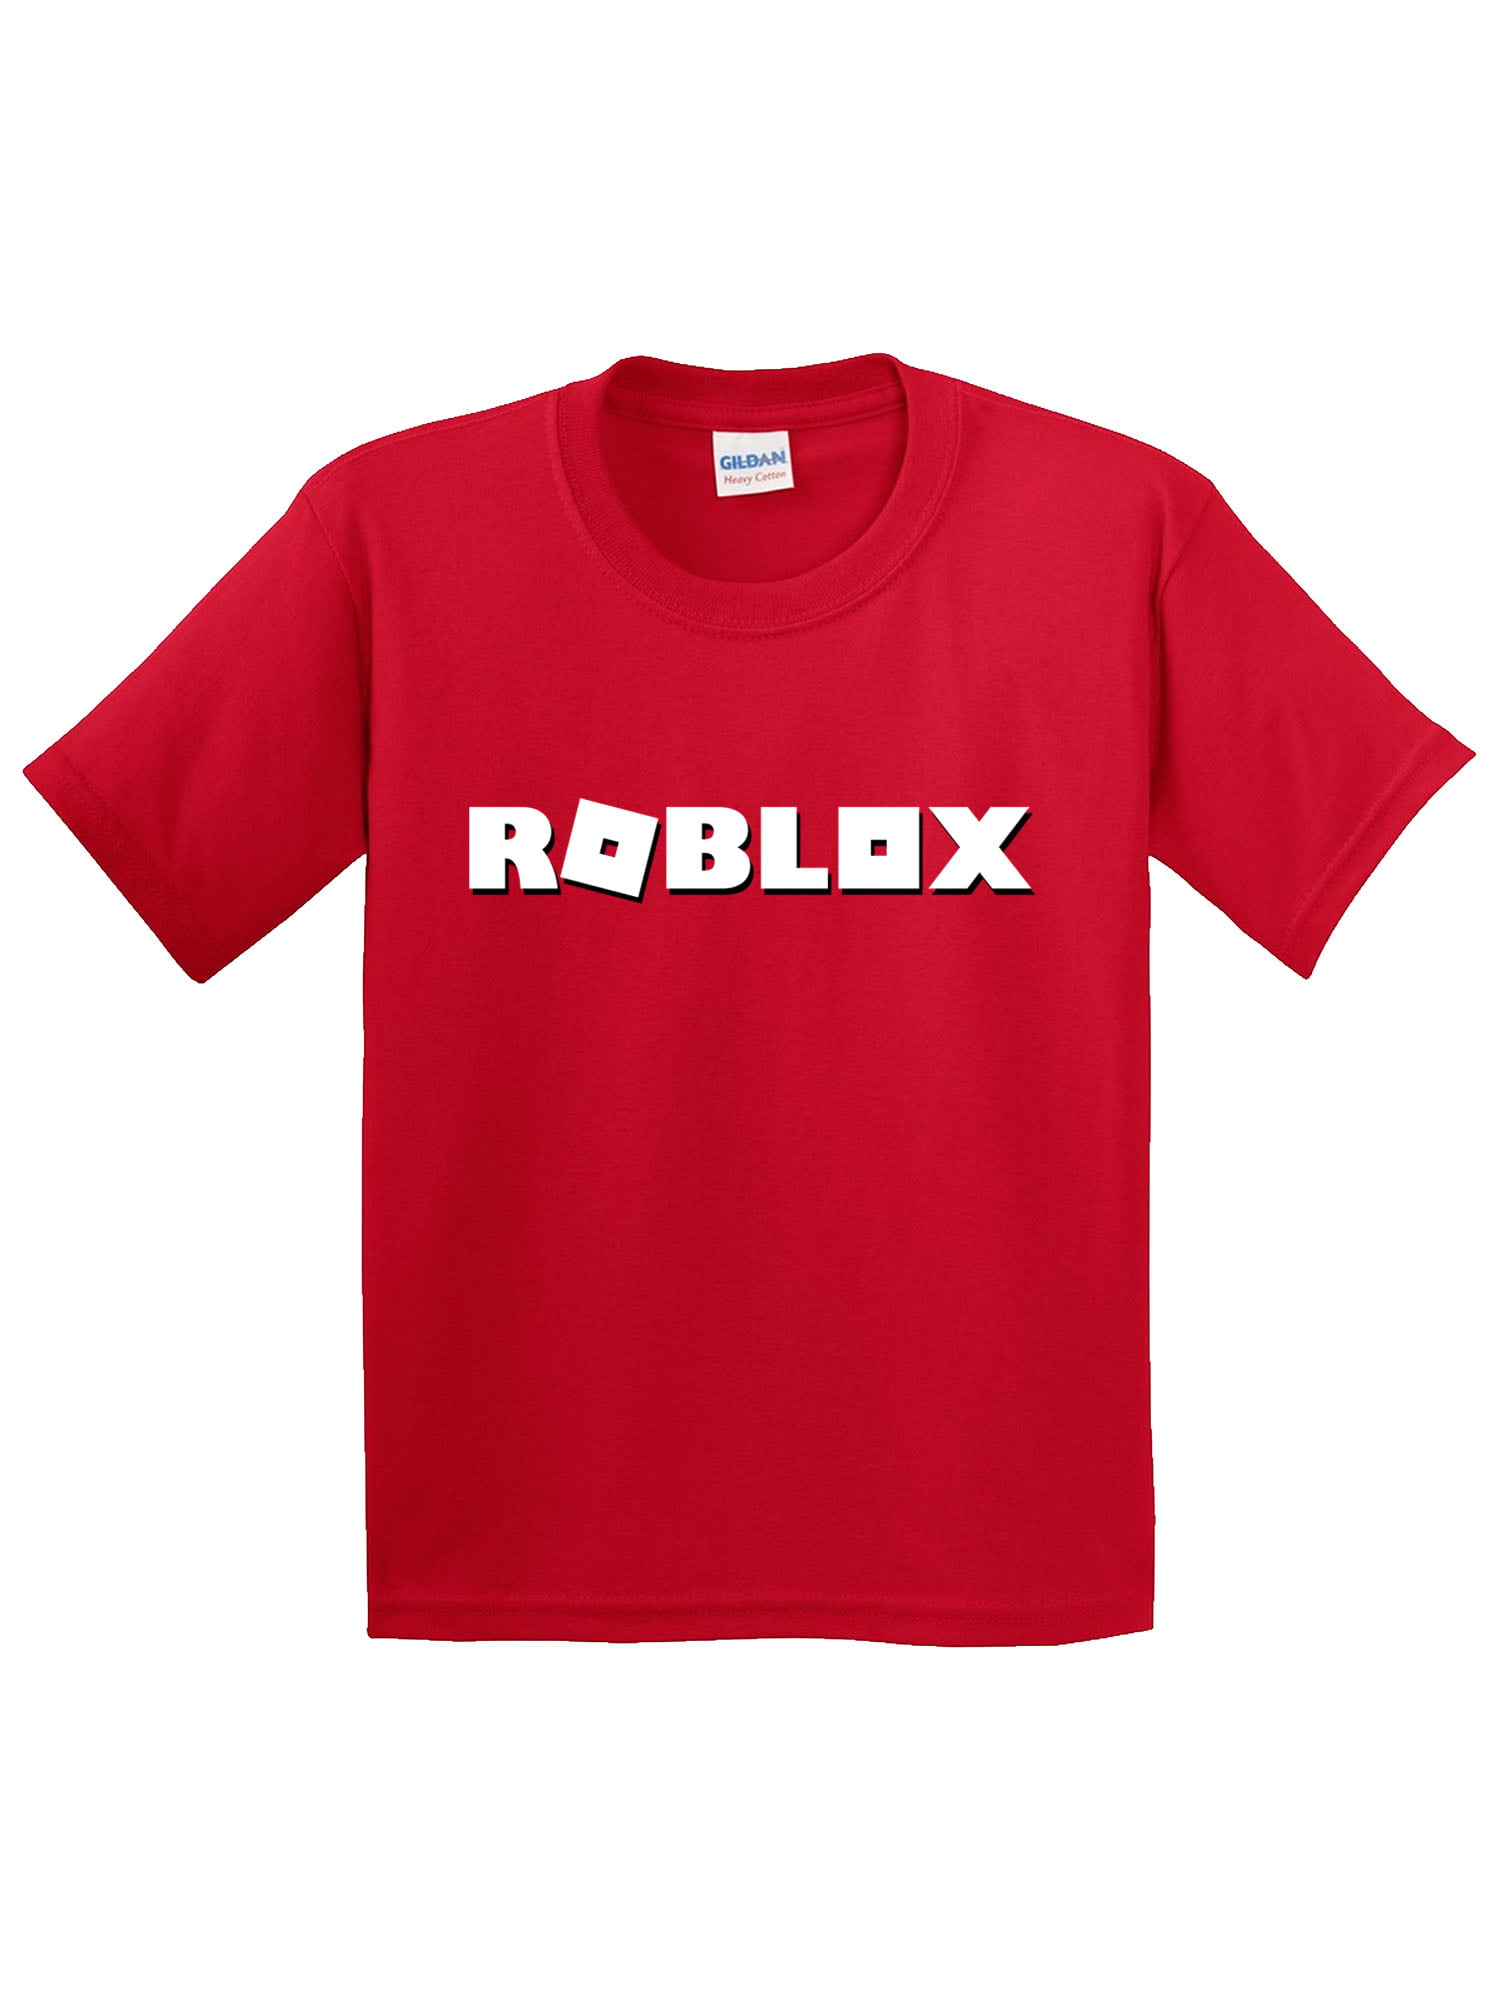 New Way New Way 923 Youth T Shirt Roblox Logo Game Accent Large Red Walmartcom - roblox girl shirt roblox t shirt roblox adult t shirt roblox